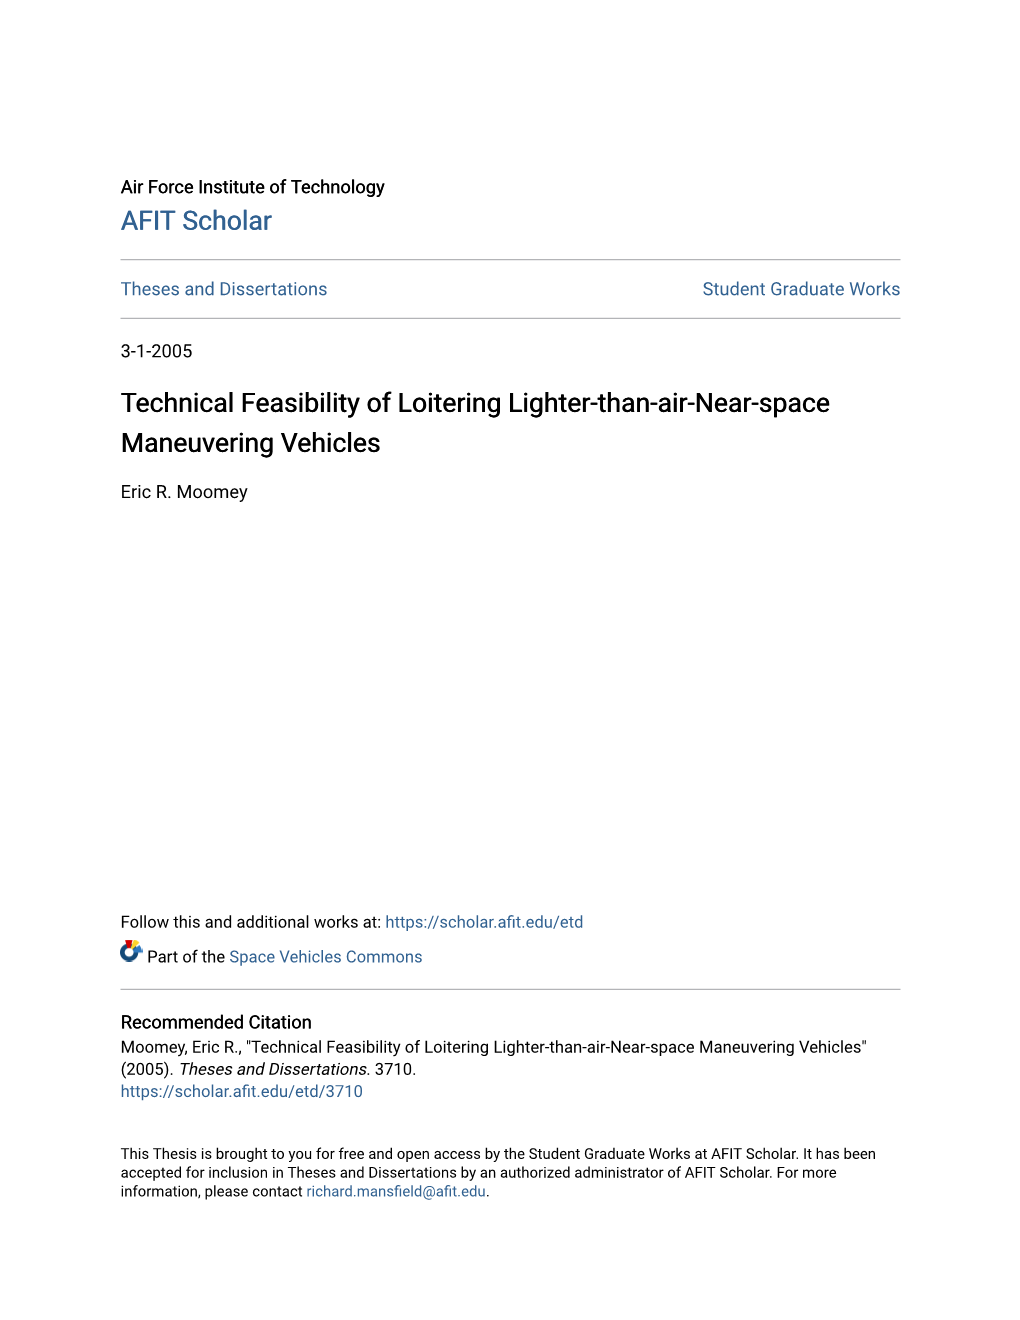 Technical Feasibility of Loitering Lighter-Than-Air-Near-Space Maneuvering Vehicles